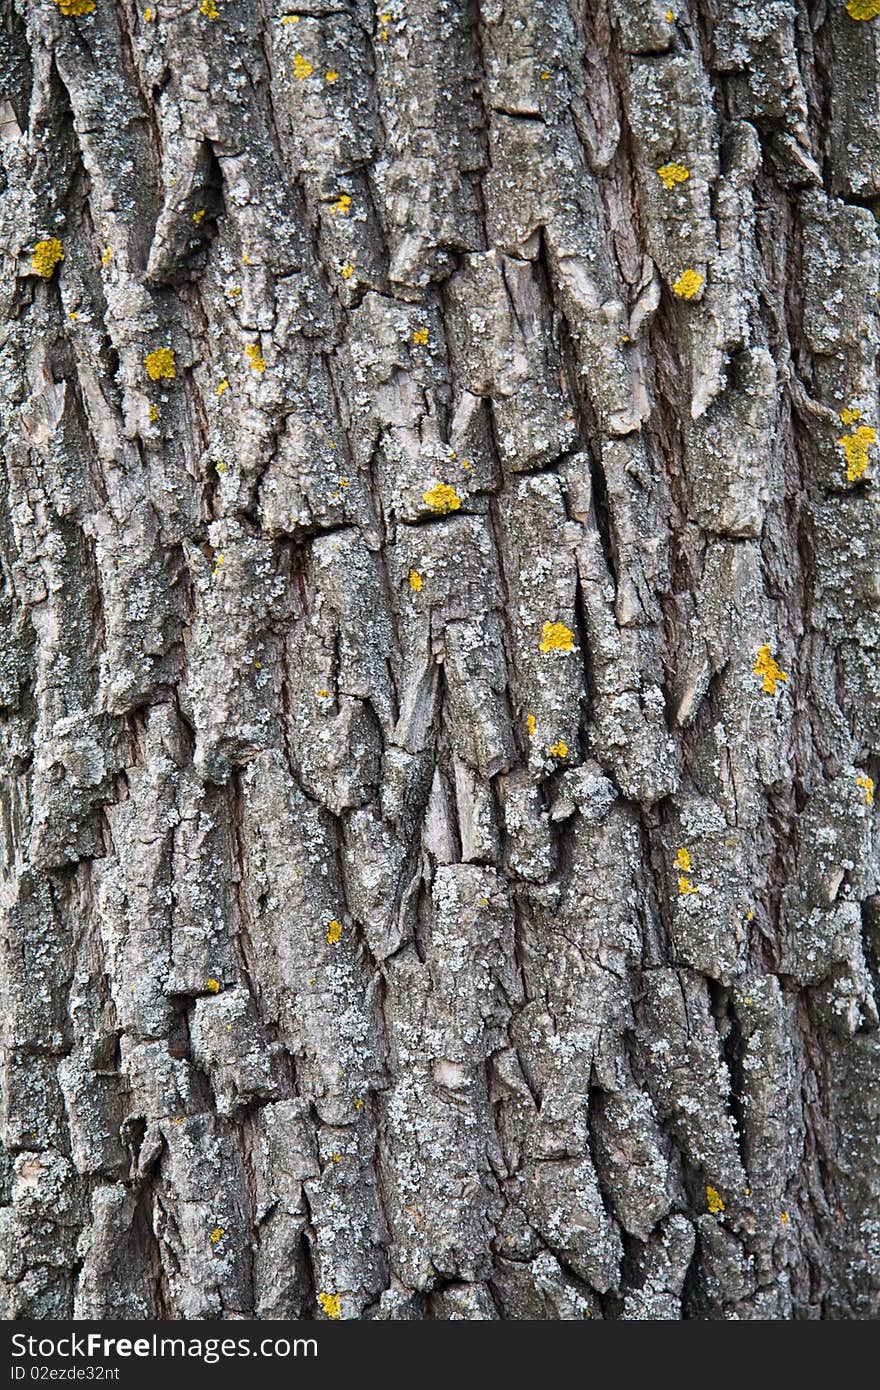 Bark on the trunk of a tree. Bark on the trunk of a tree